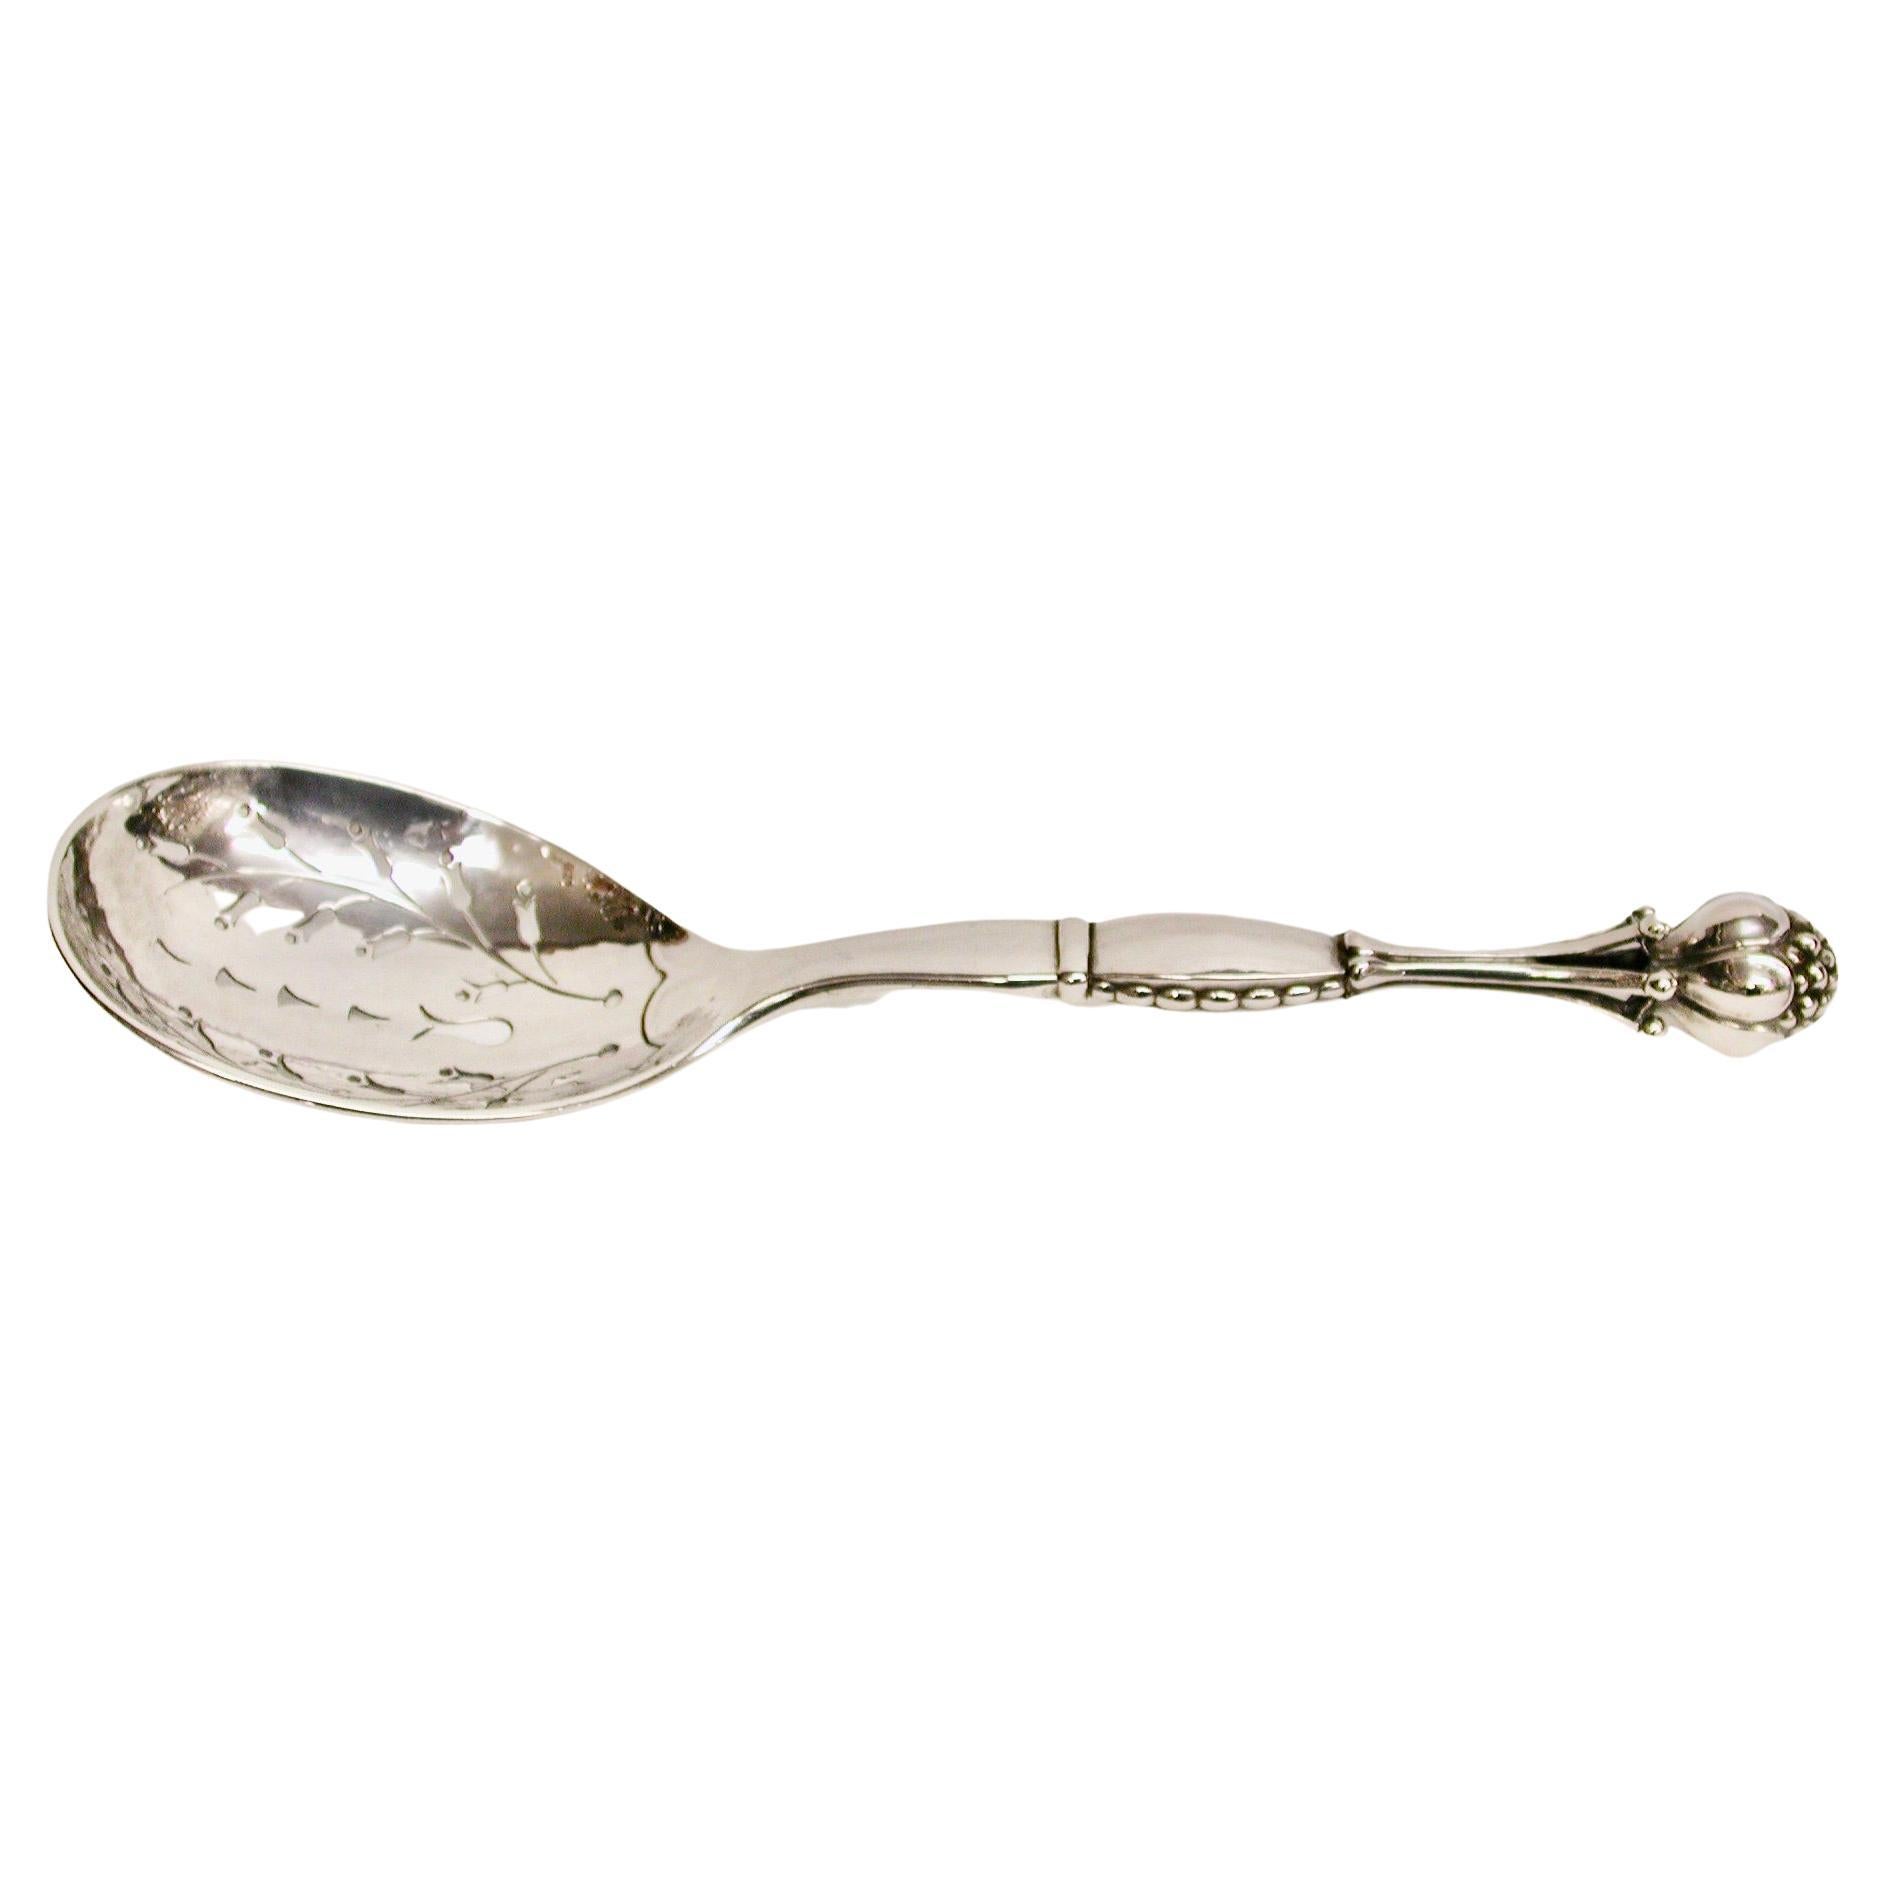 Georg Jensen Silver Hand Pierced Fruit Spoon Dated circa 1915, Pattern No 38 For Sale